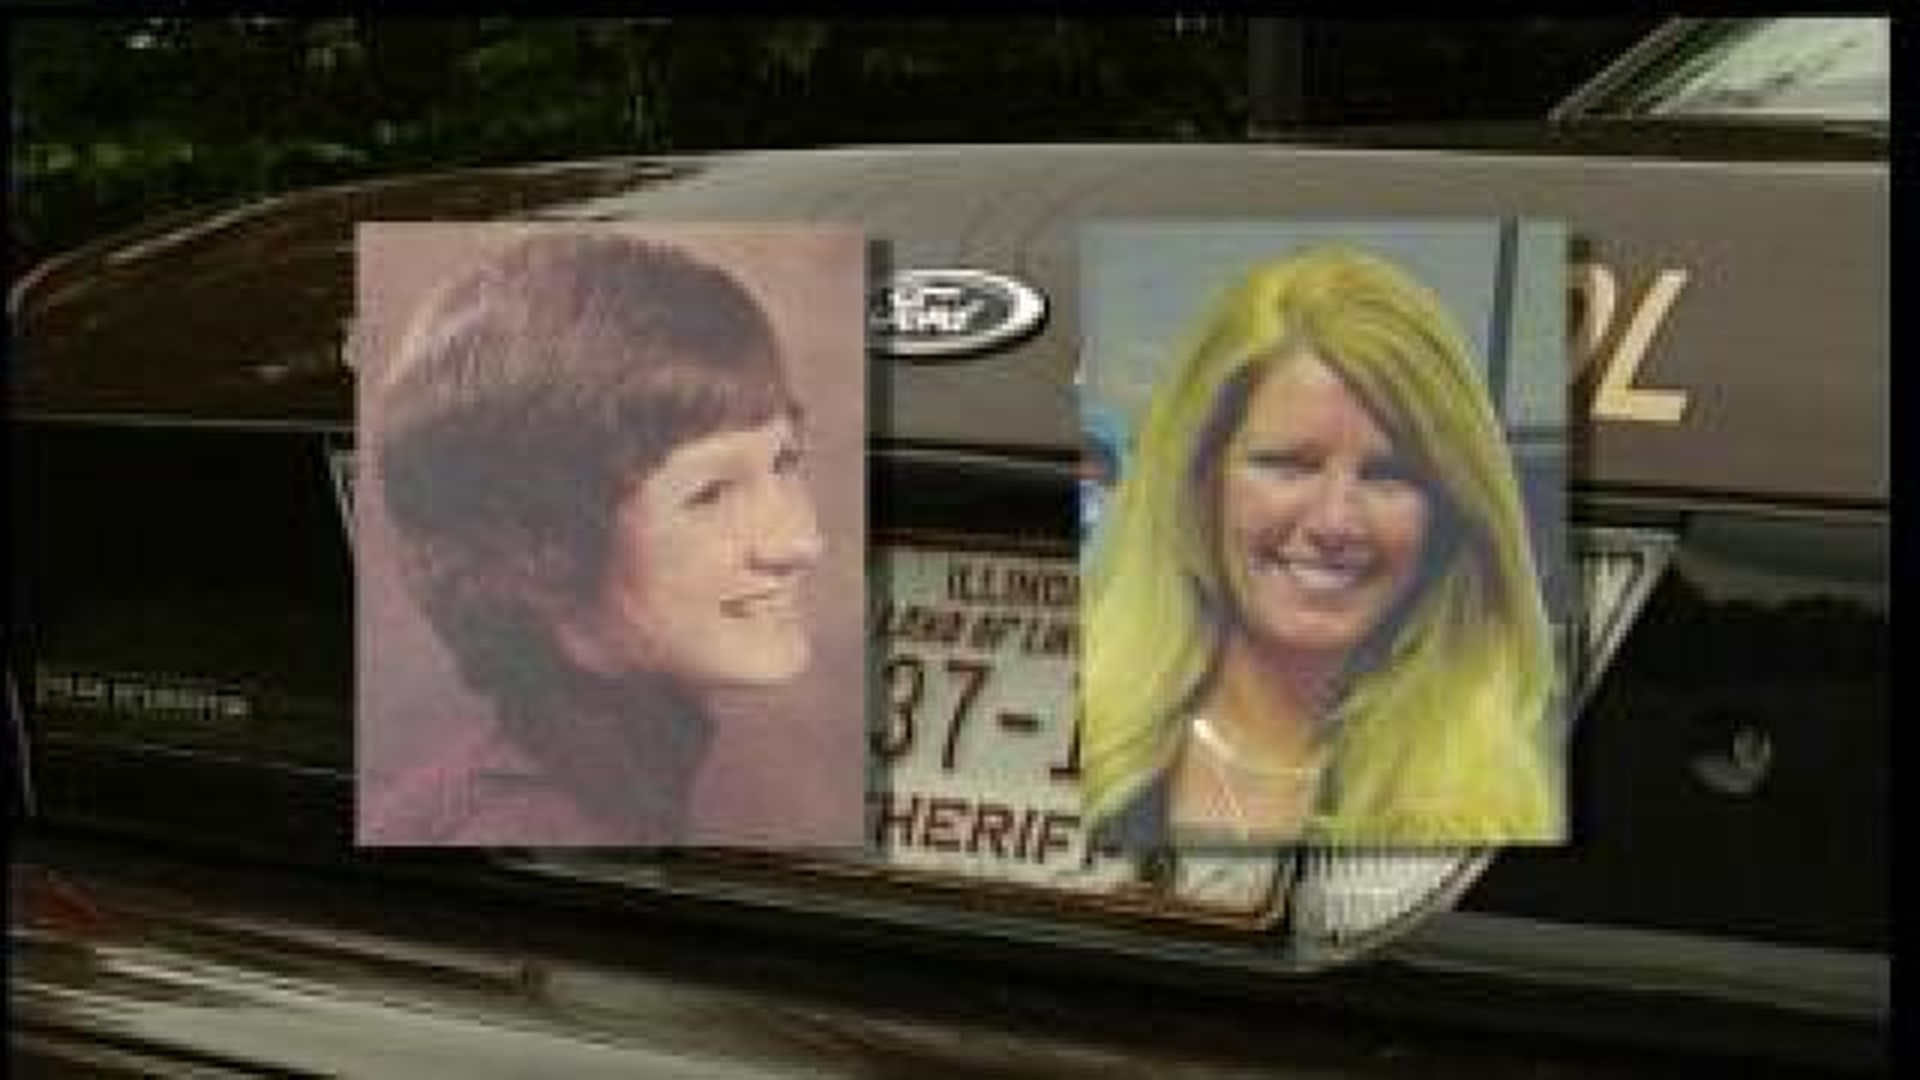 Two Local Cold Cases Featured on Illinois State Police Web Site